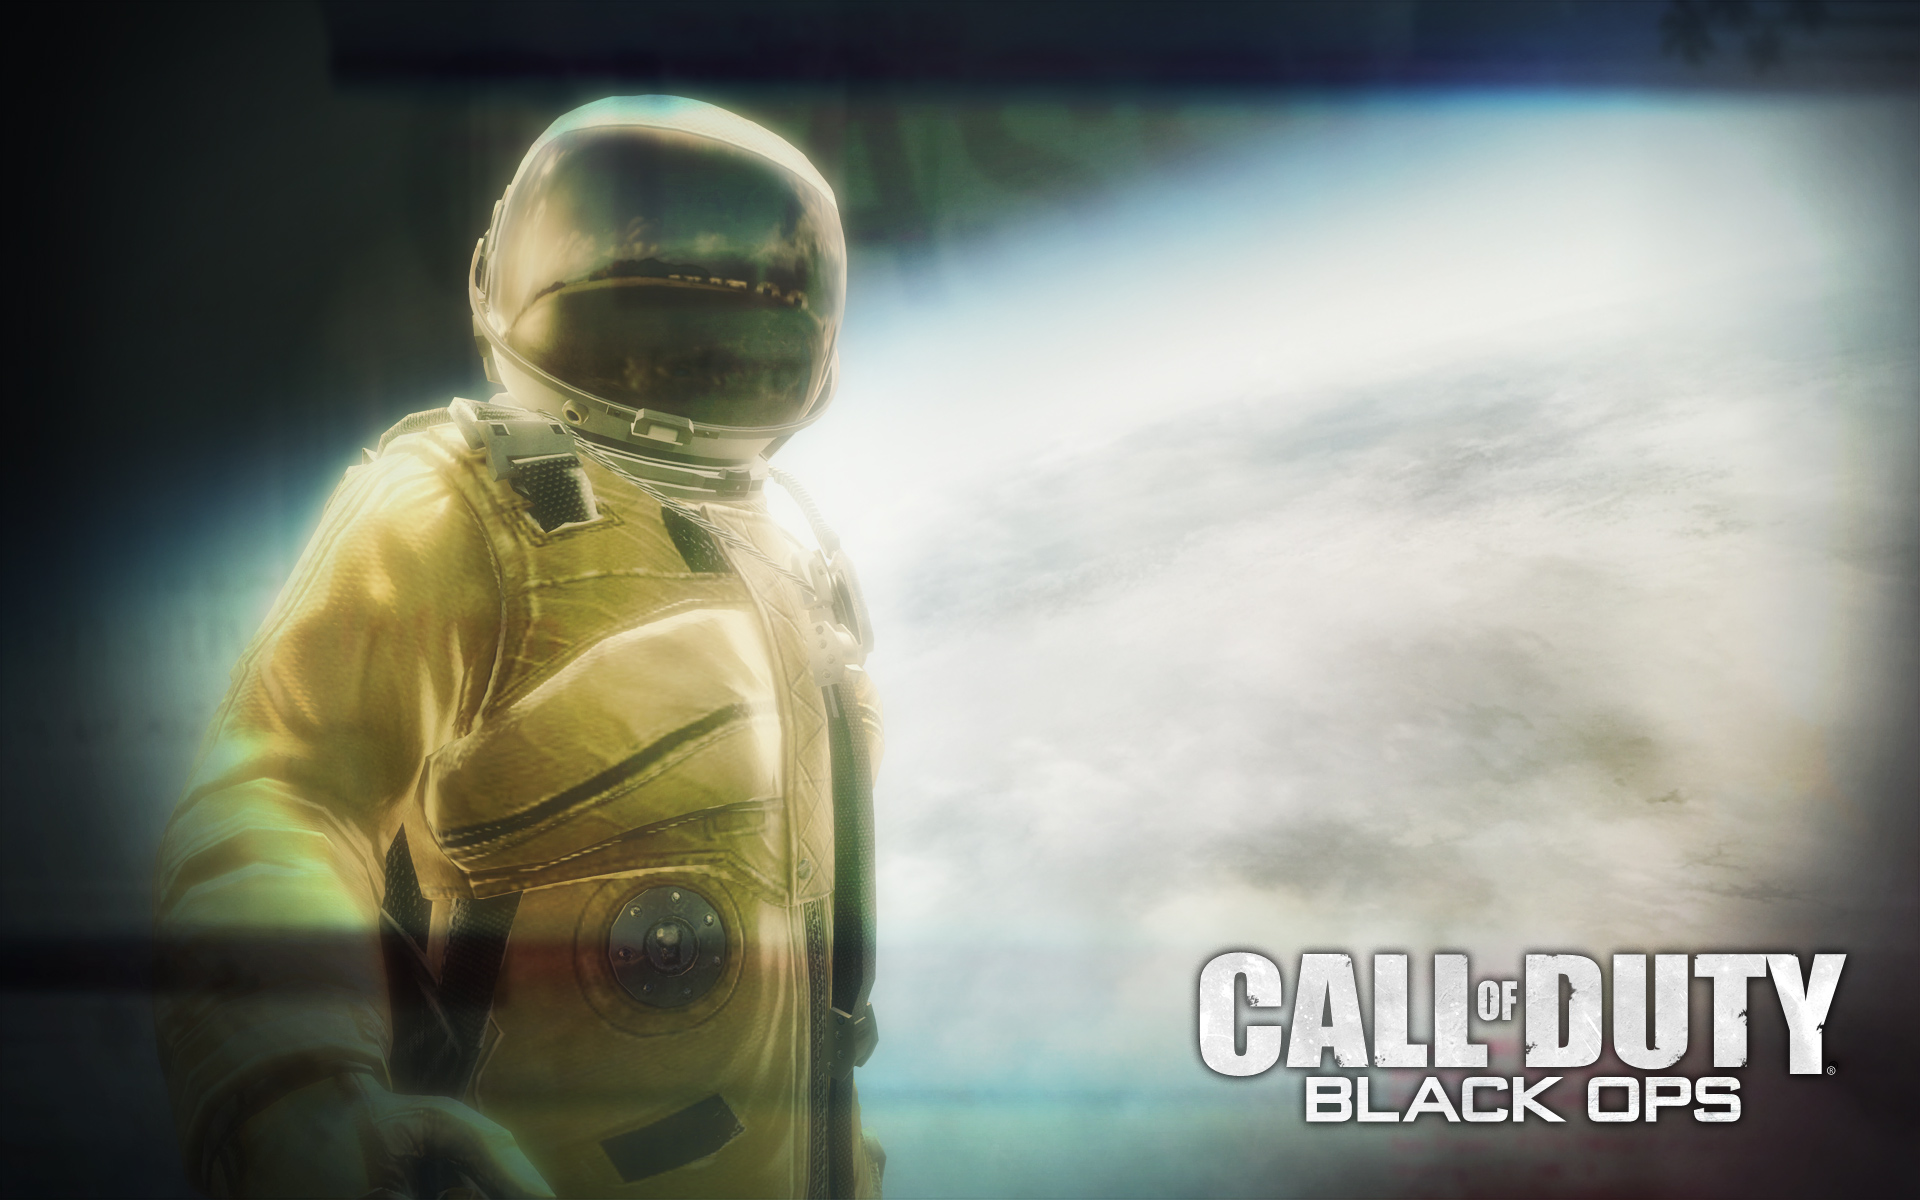 Call Of Duty Black Ops Wallpaper 1080p